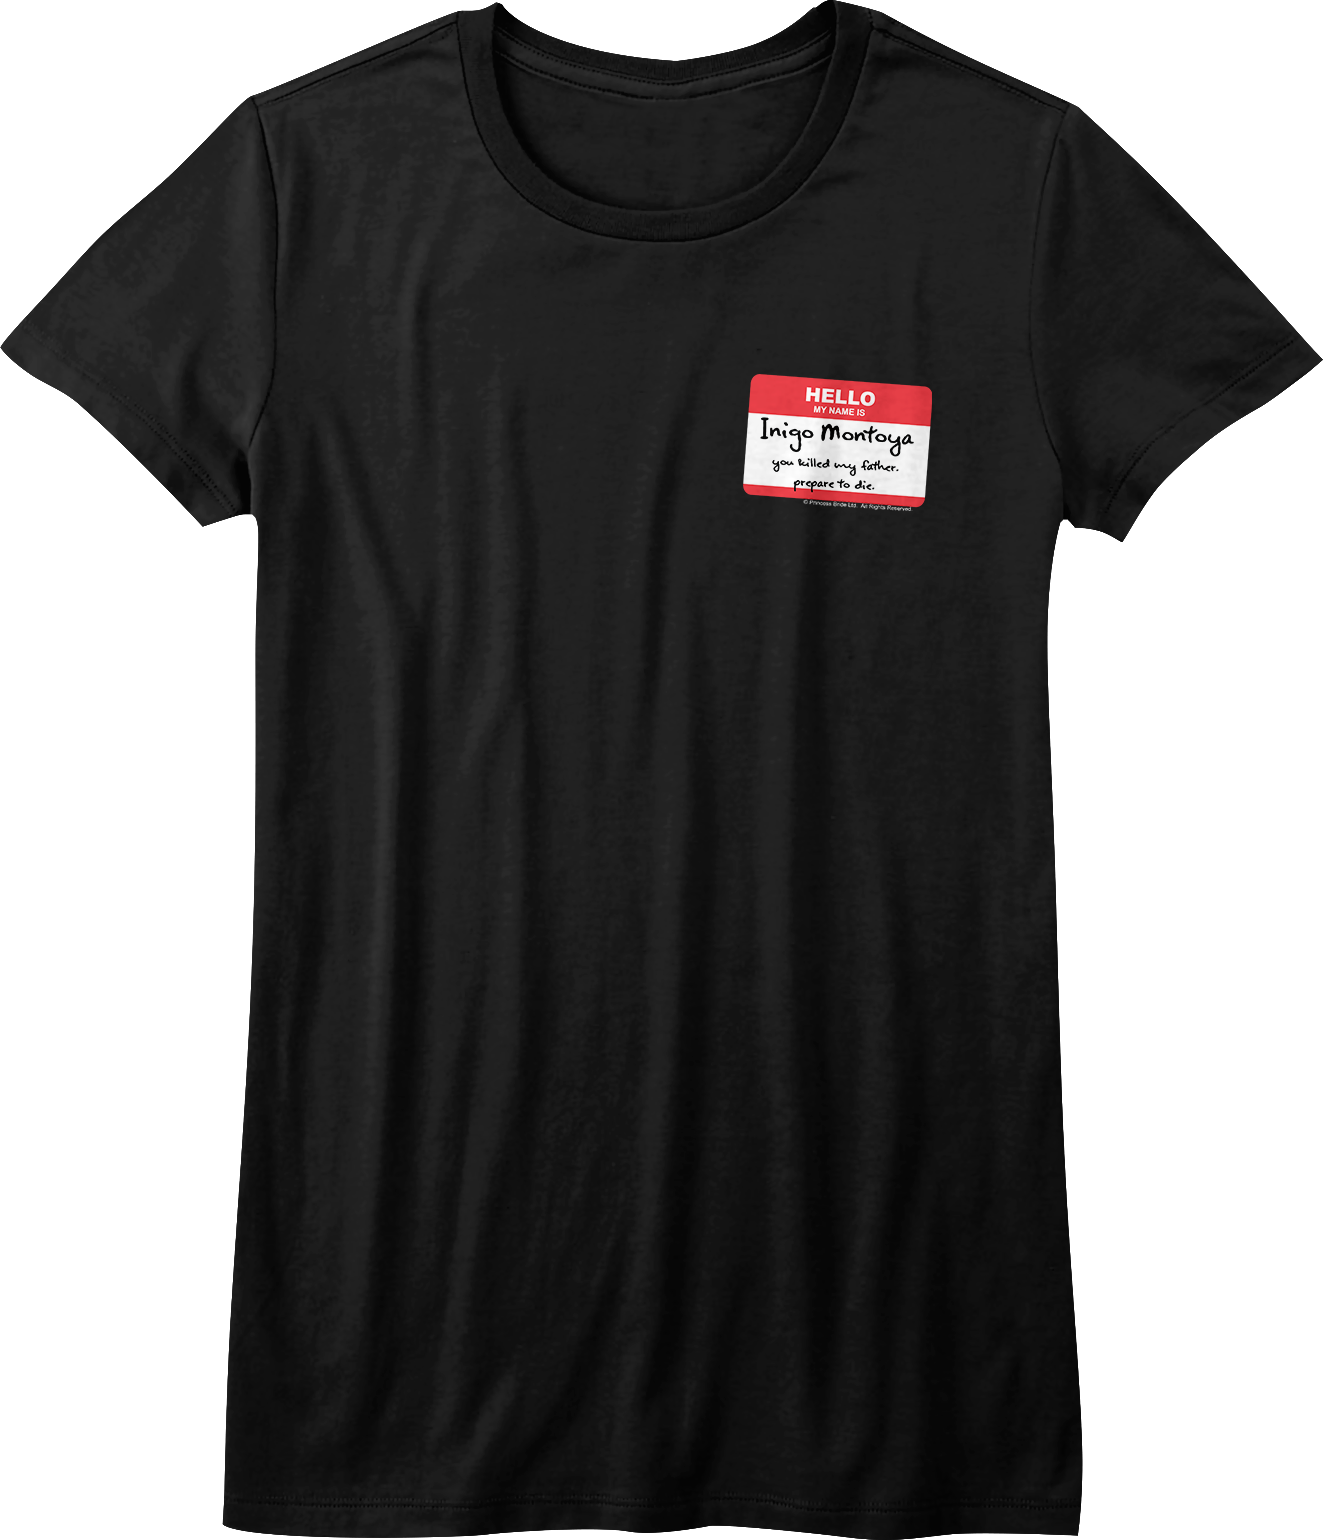 A Black Shirt With A White And Red Tag On It